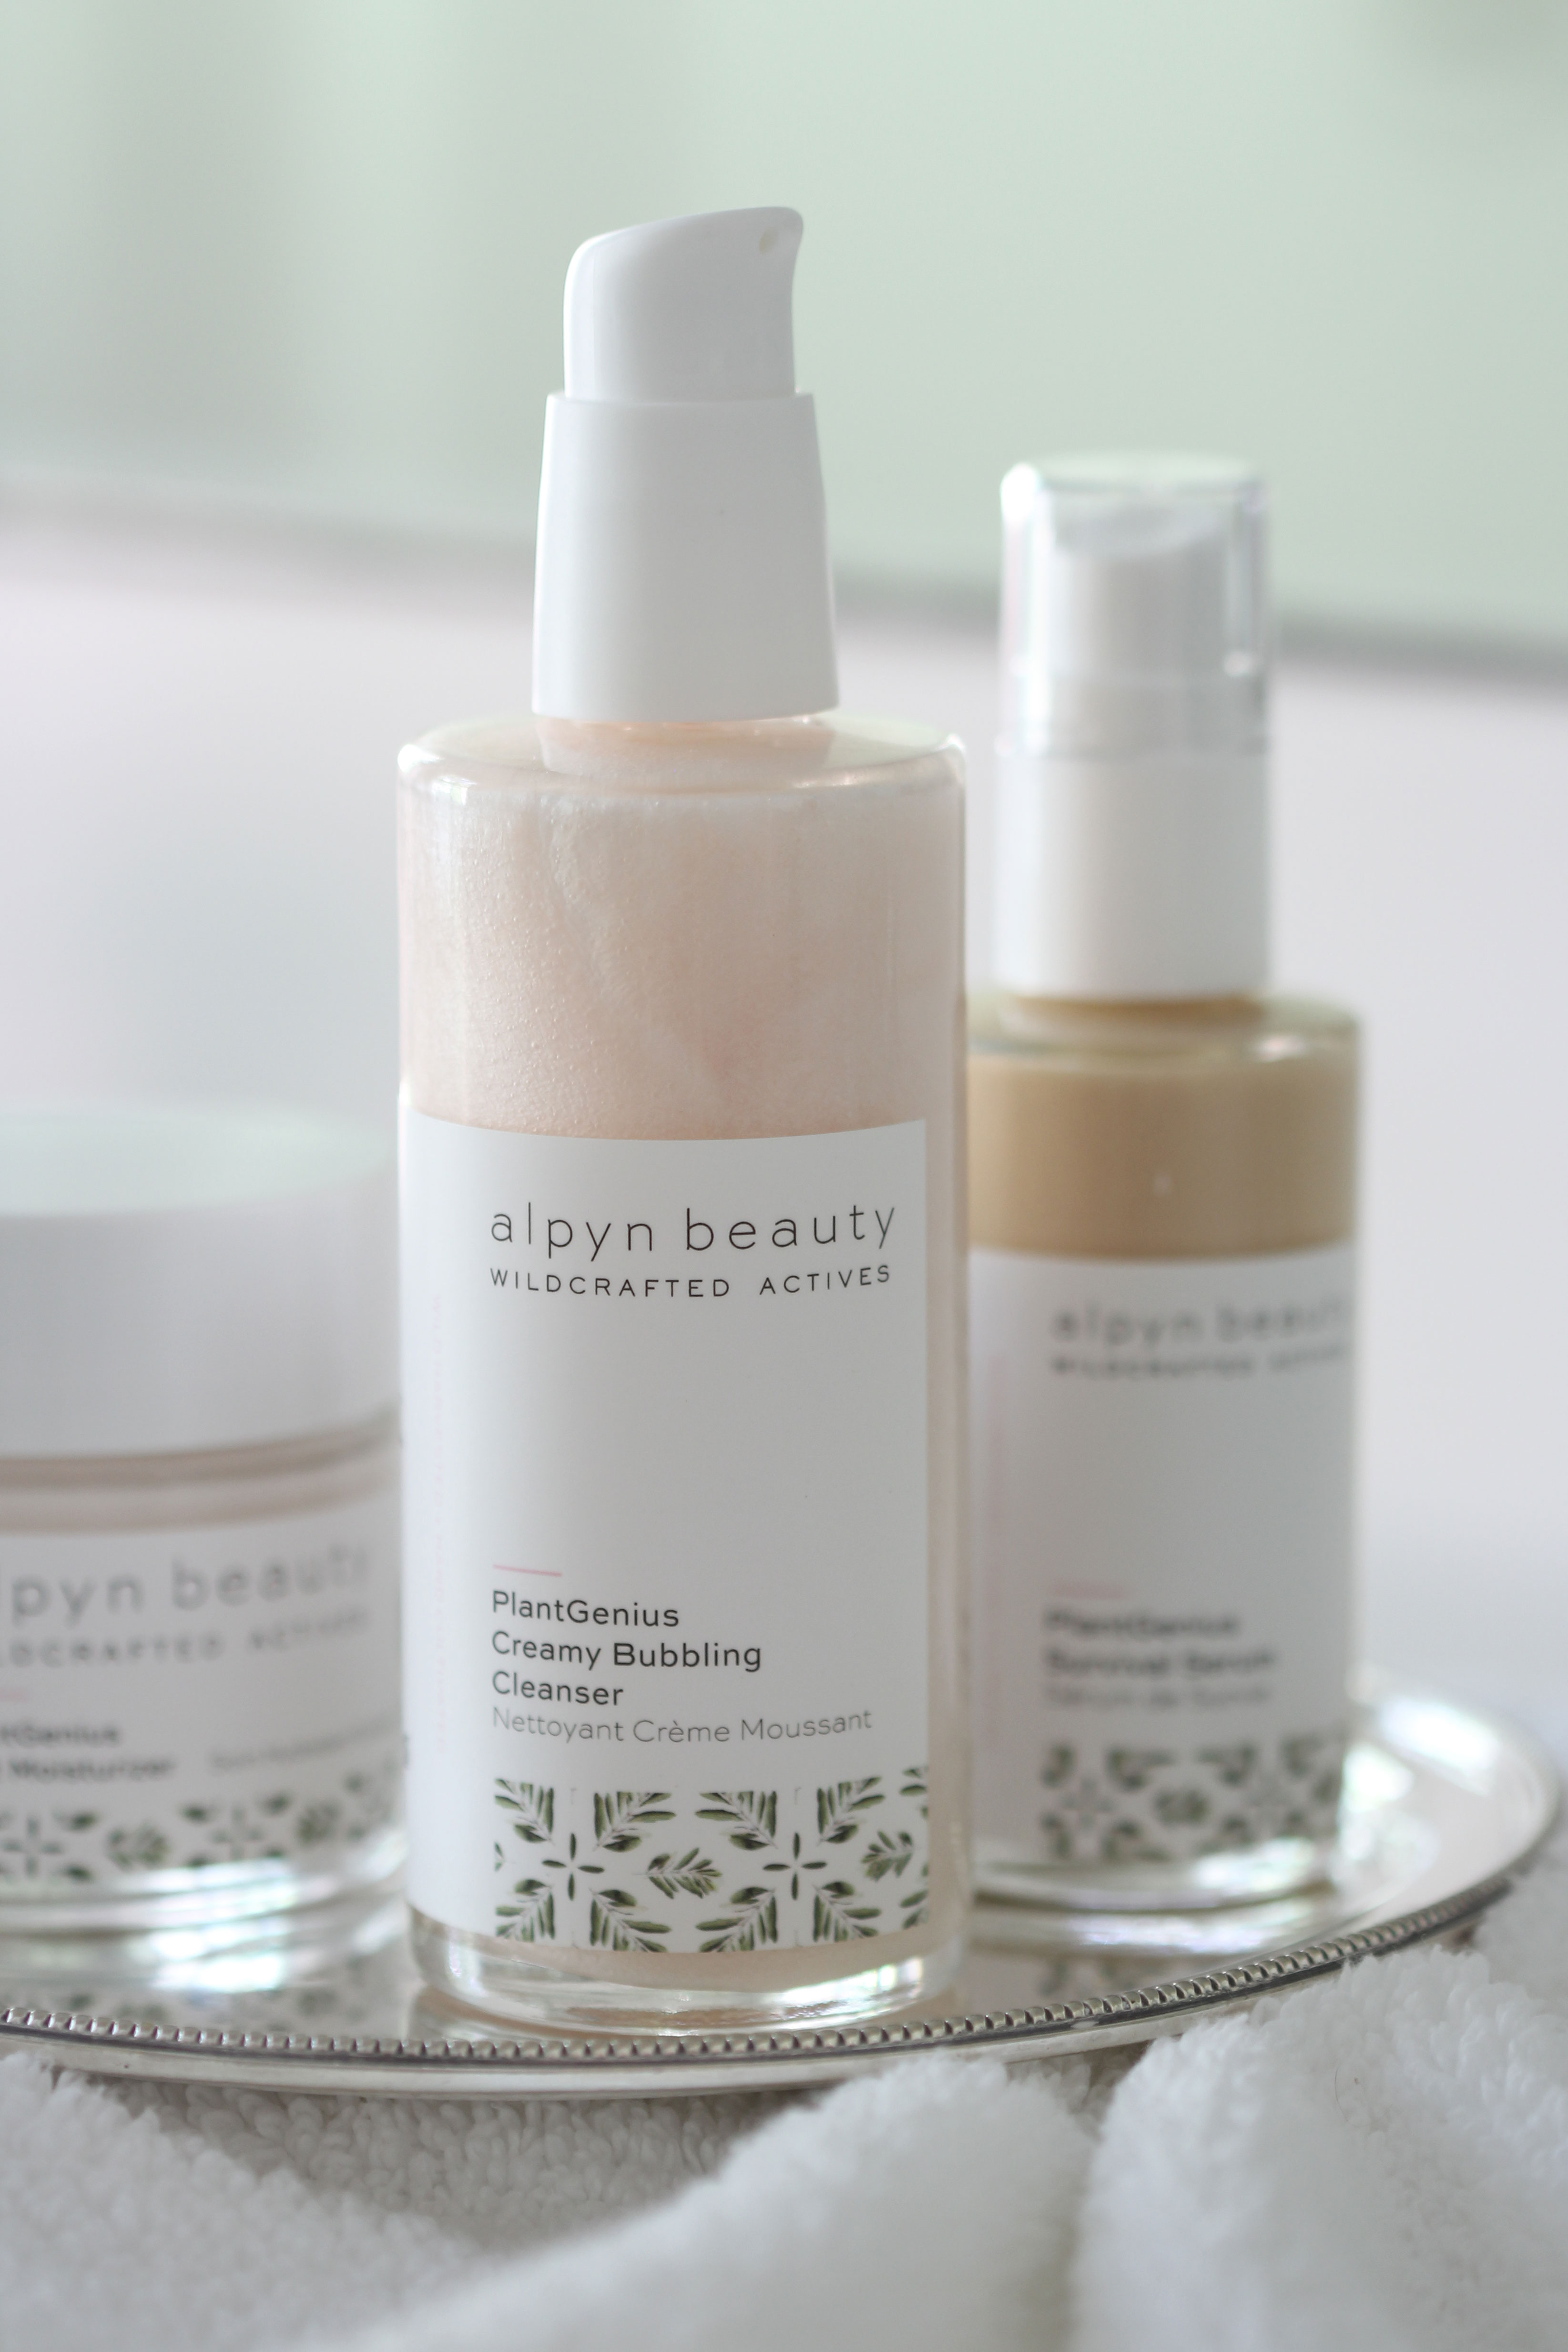 Treat your skin to them best clean beauty products from Alpyn Beauty! Includes a cleanser that gently exfoliates with fruit enzymes & removes dirt, debris and makeup.